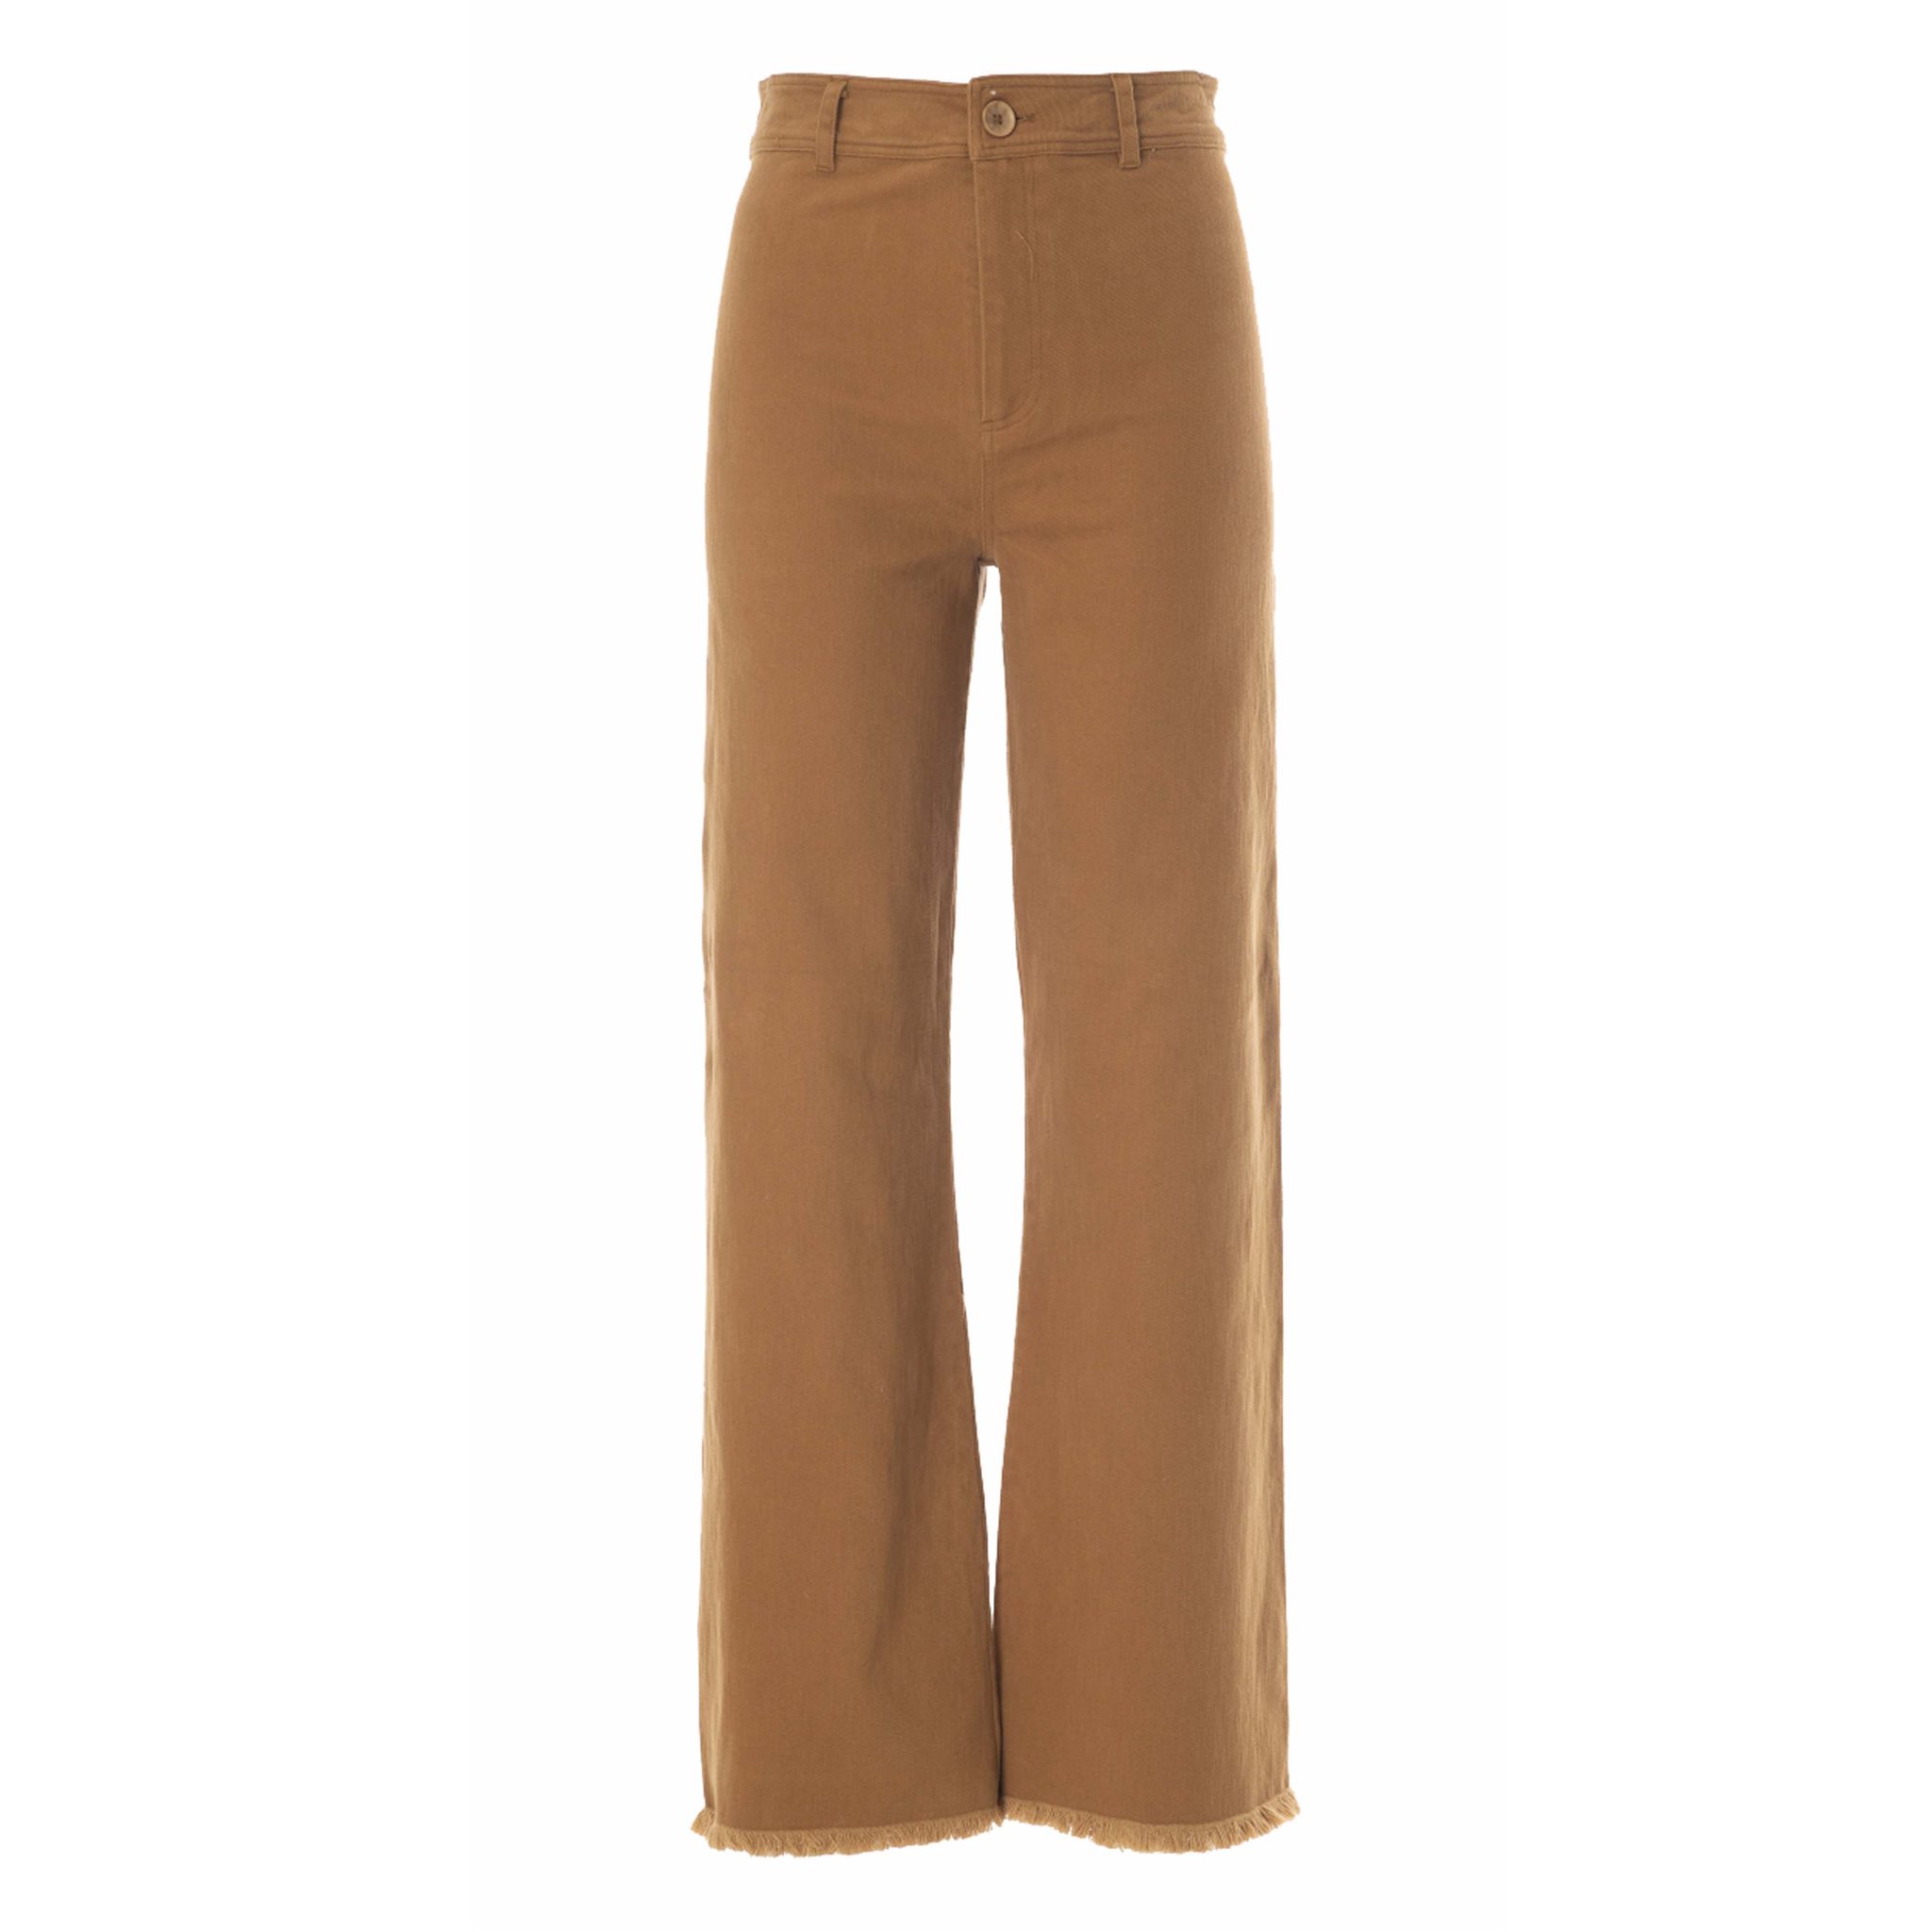 Ruby trousers Jc SOPHIE